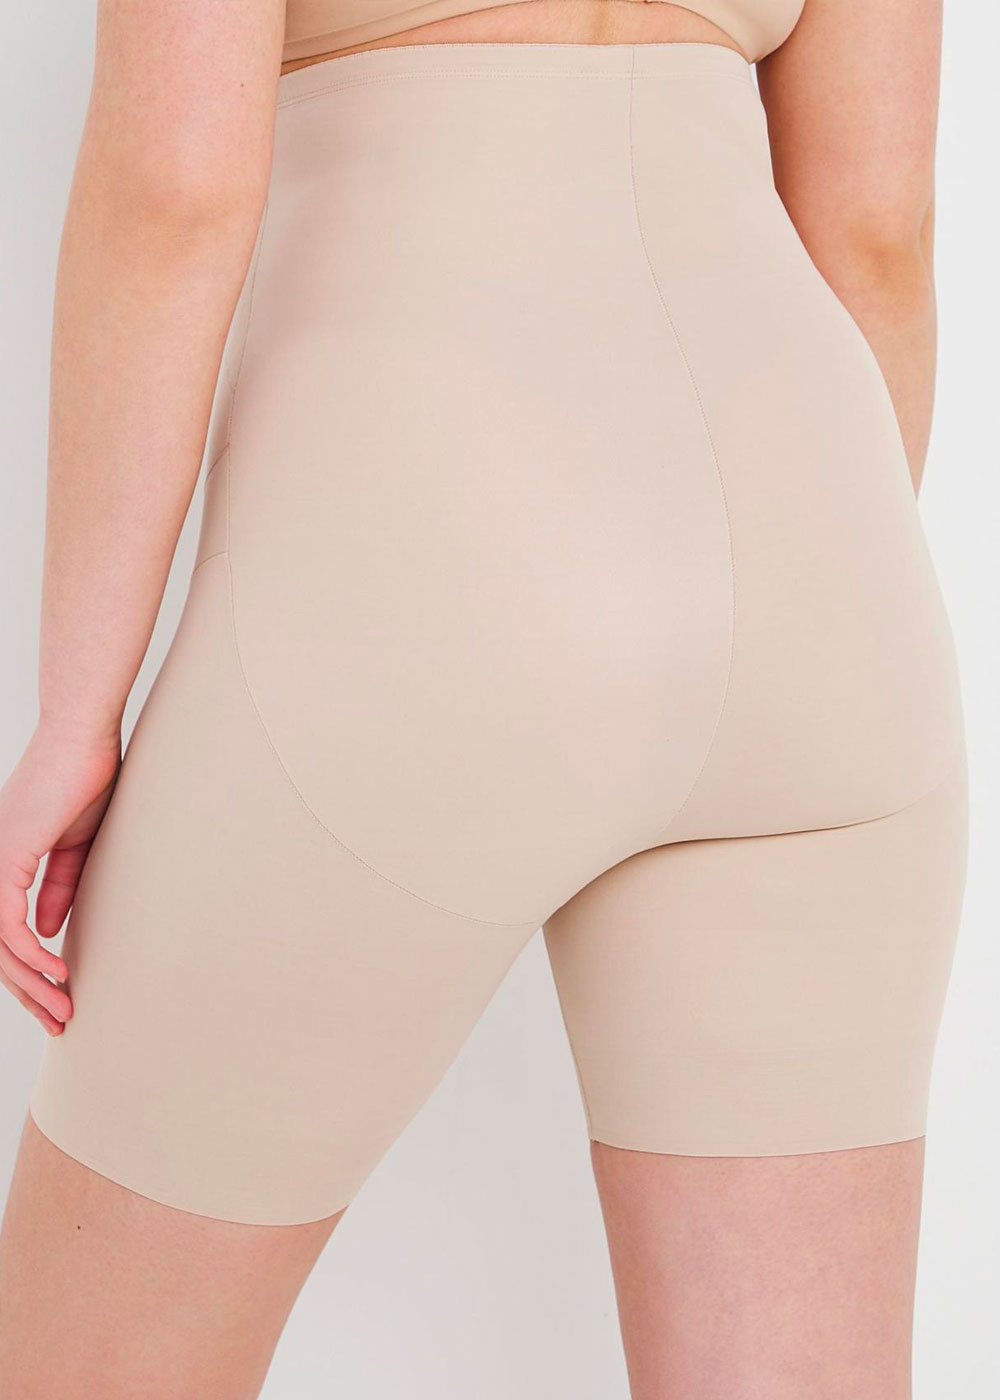 Miraclesuit TummyTuck Thigh Slimmer Nude